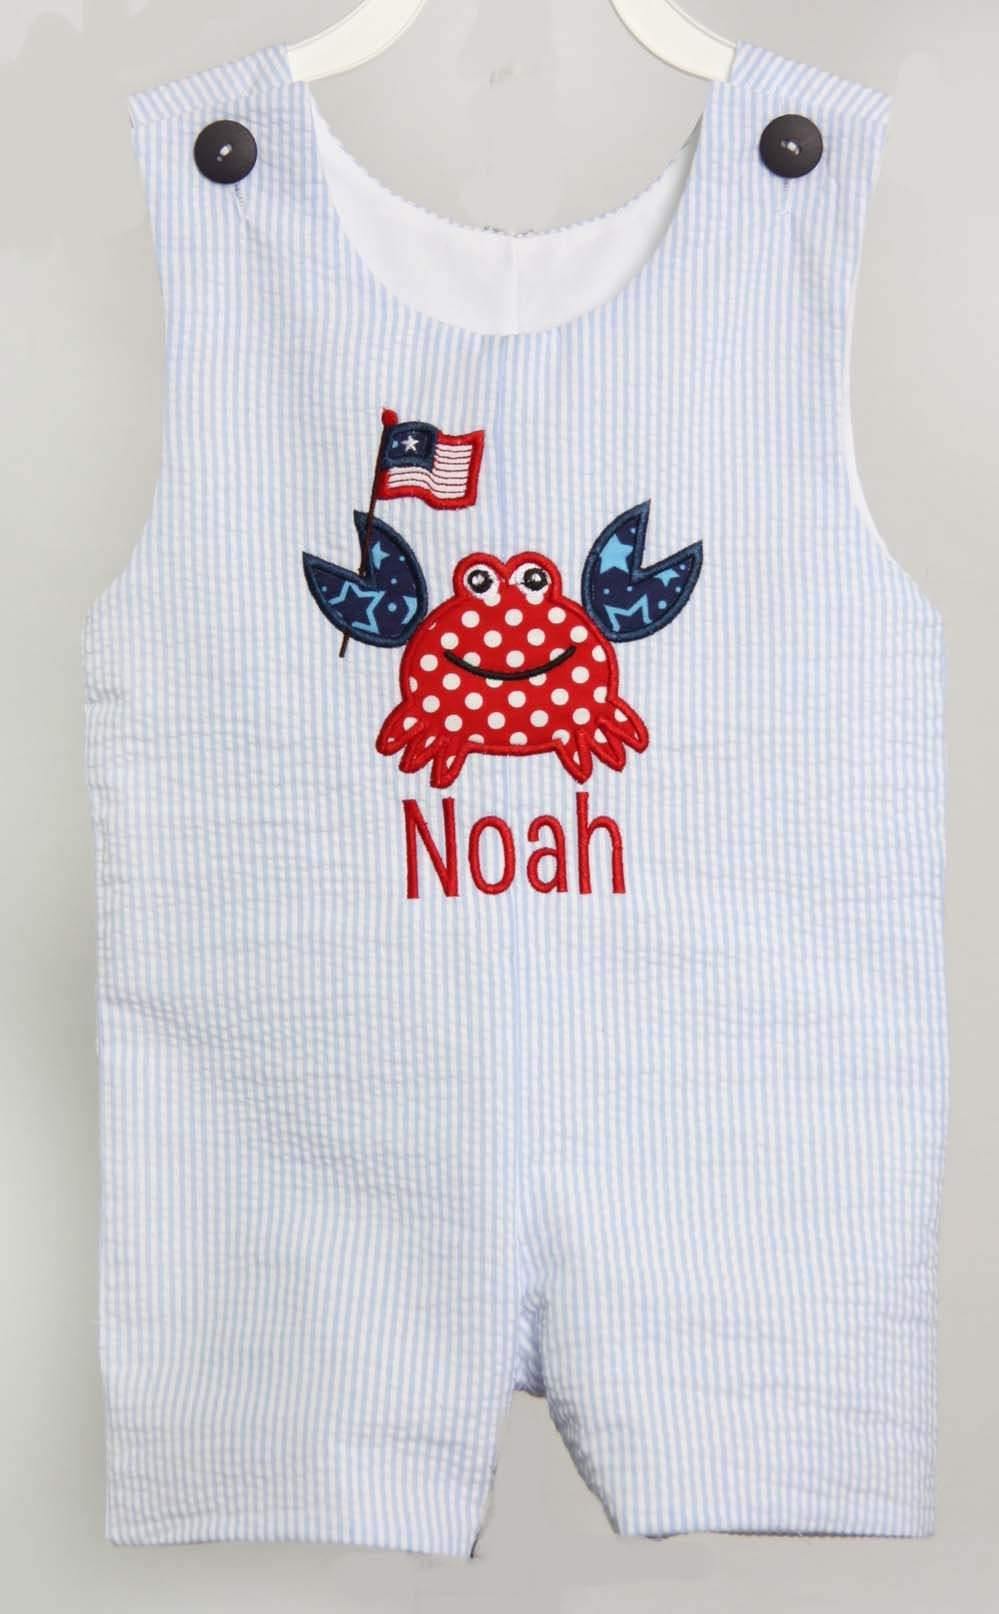 4th of july baby clothes